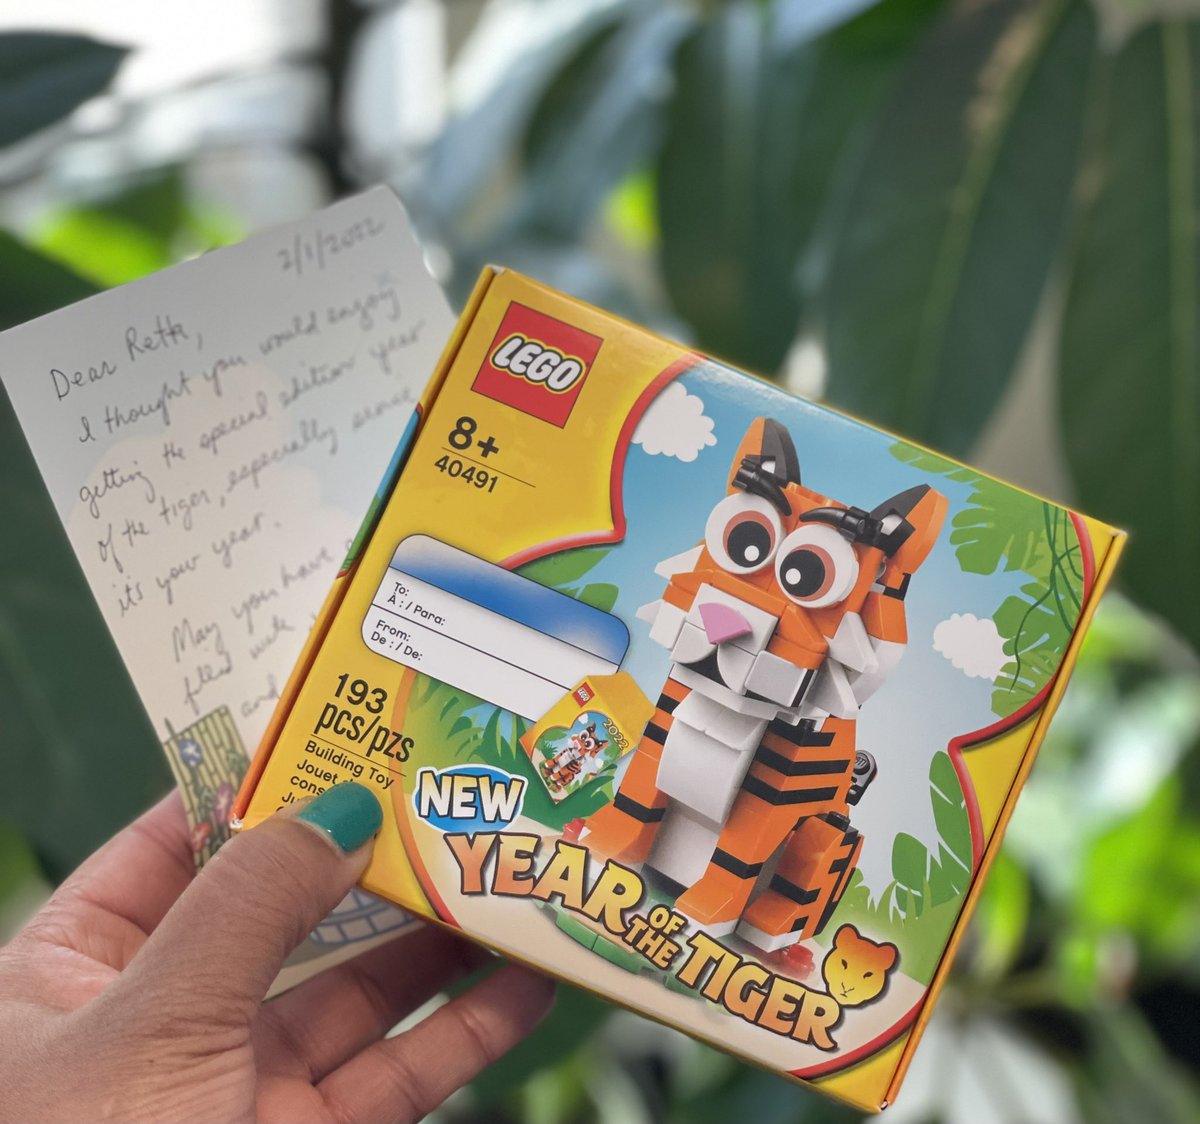 What better way to start the #LunarNewYear than to open a thoughtful gift from one of @BorealisPhil’s amazing board members. @aliceyhom knows I committed to more play & whimsy this year, so they gifted me a limited addition #YearOfTheTiger @LEGO_Group! Thank you! #joyandjustice